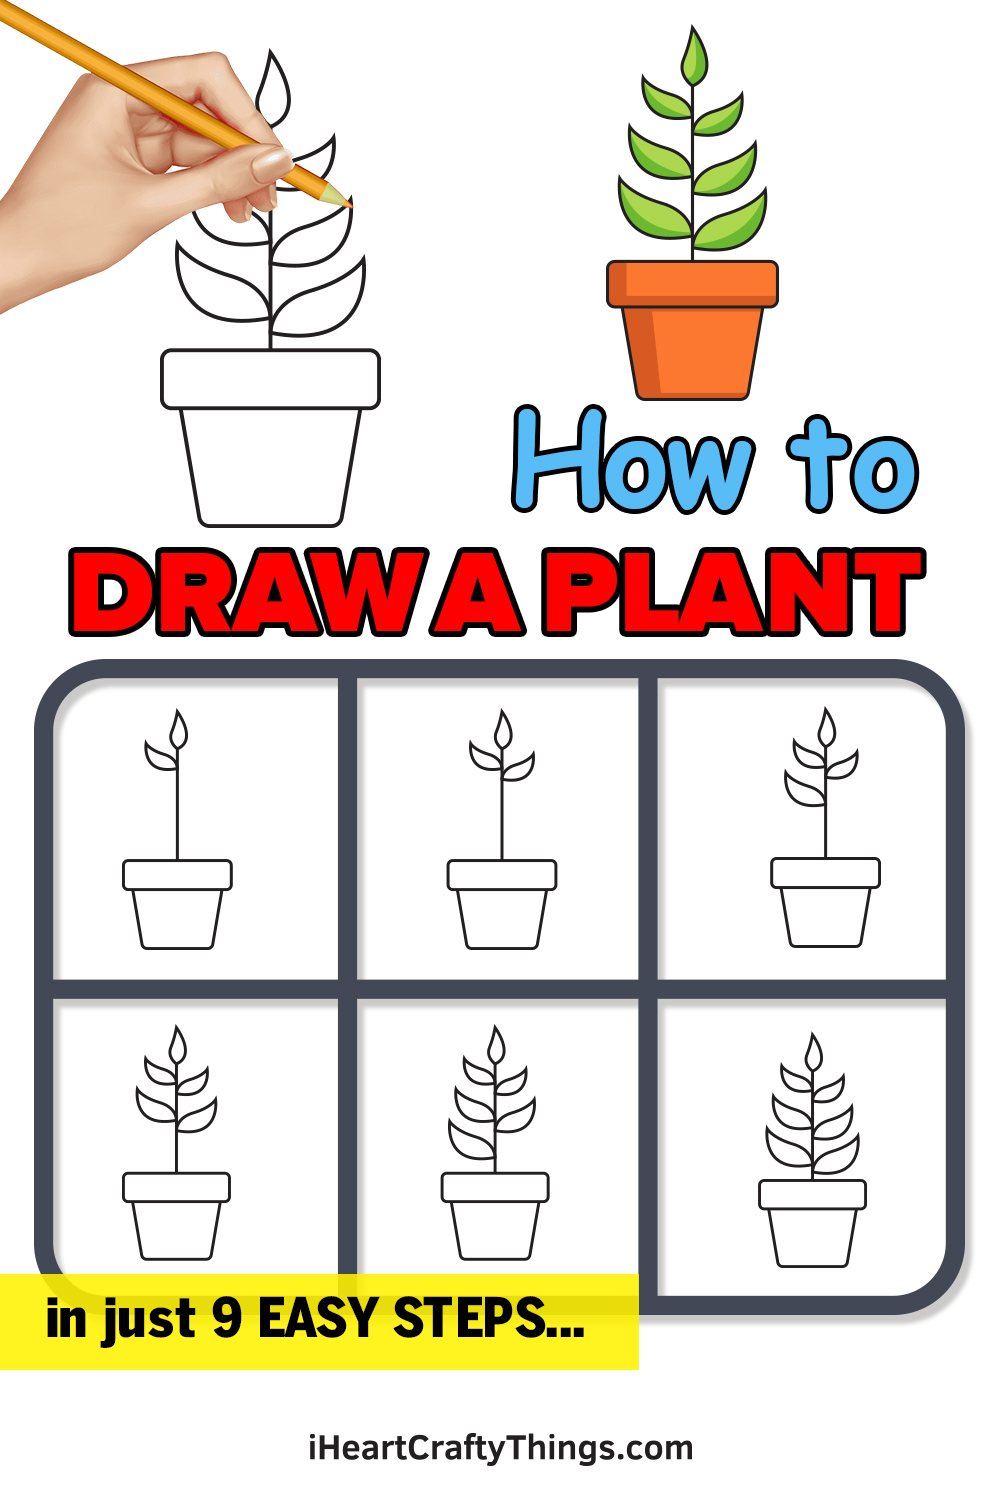 How to draw a tree in 9 easy steps